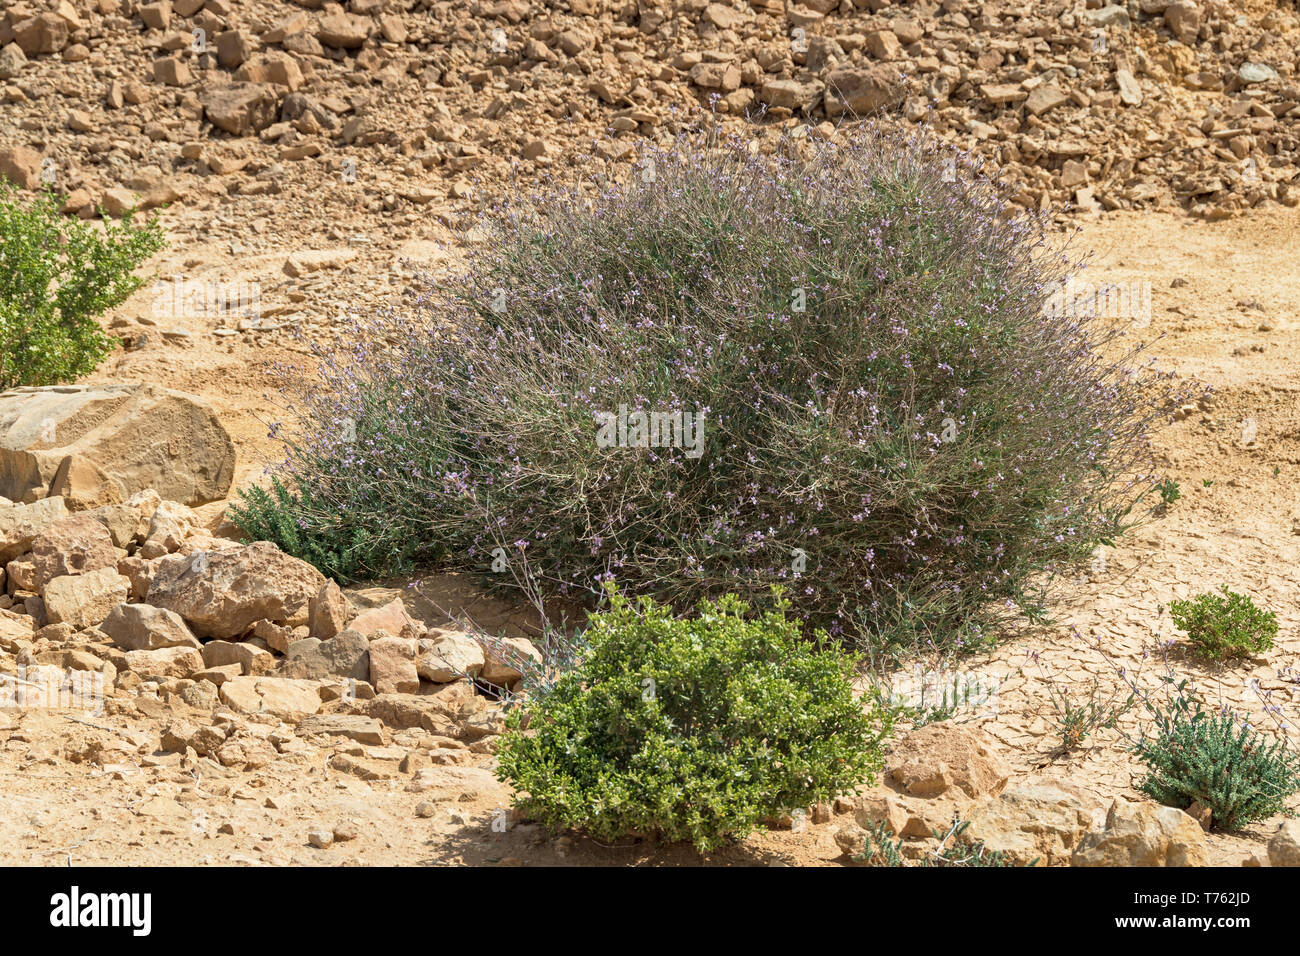 two small shrubs that are typical arava desert vegetation growing in the eilat mountains in israel Stock Photo